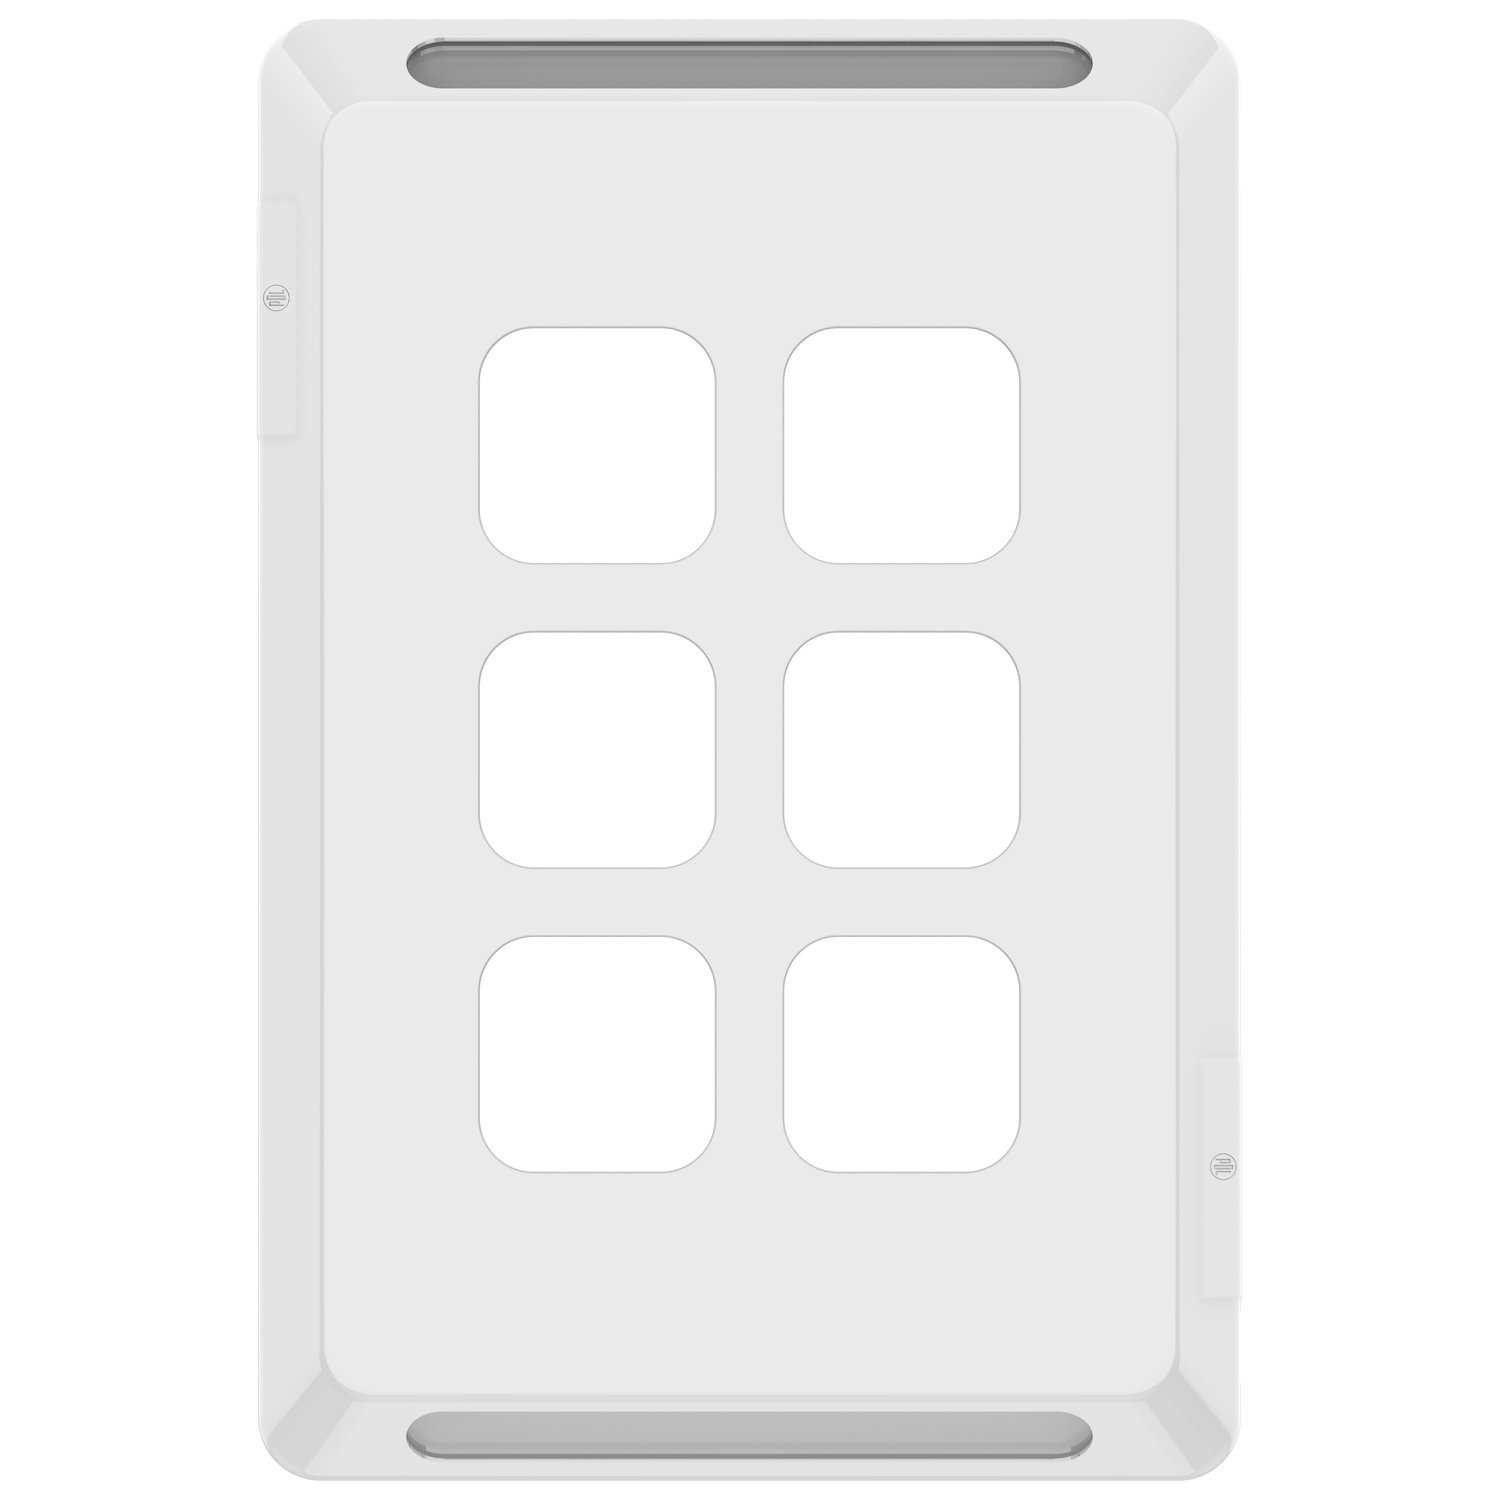 PDL Pro Series - Grid + Cover Plate Switch 6-Gang - White